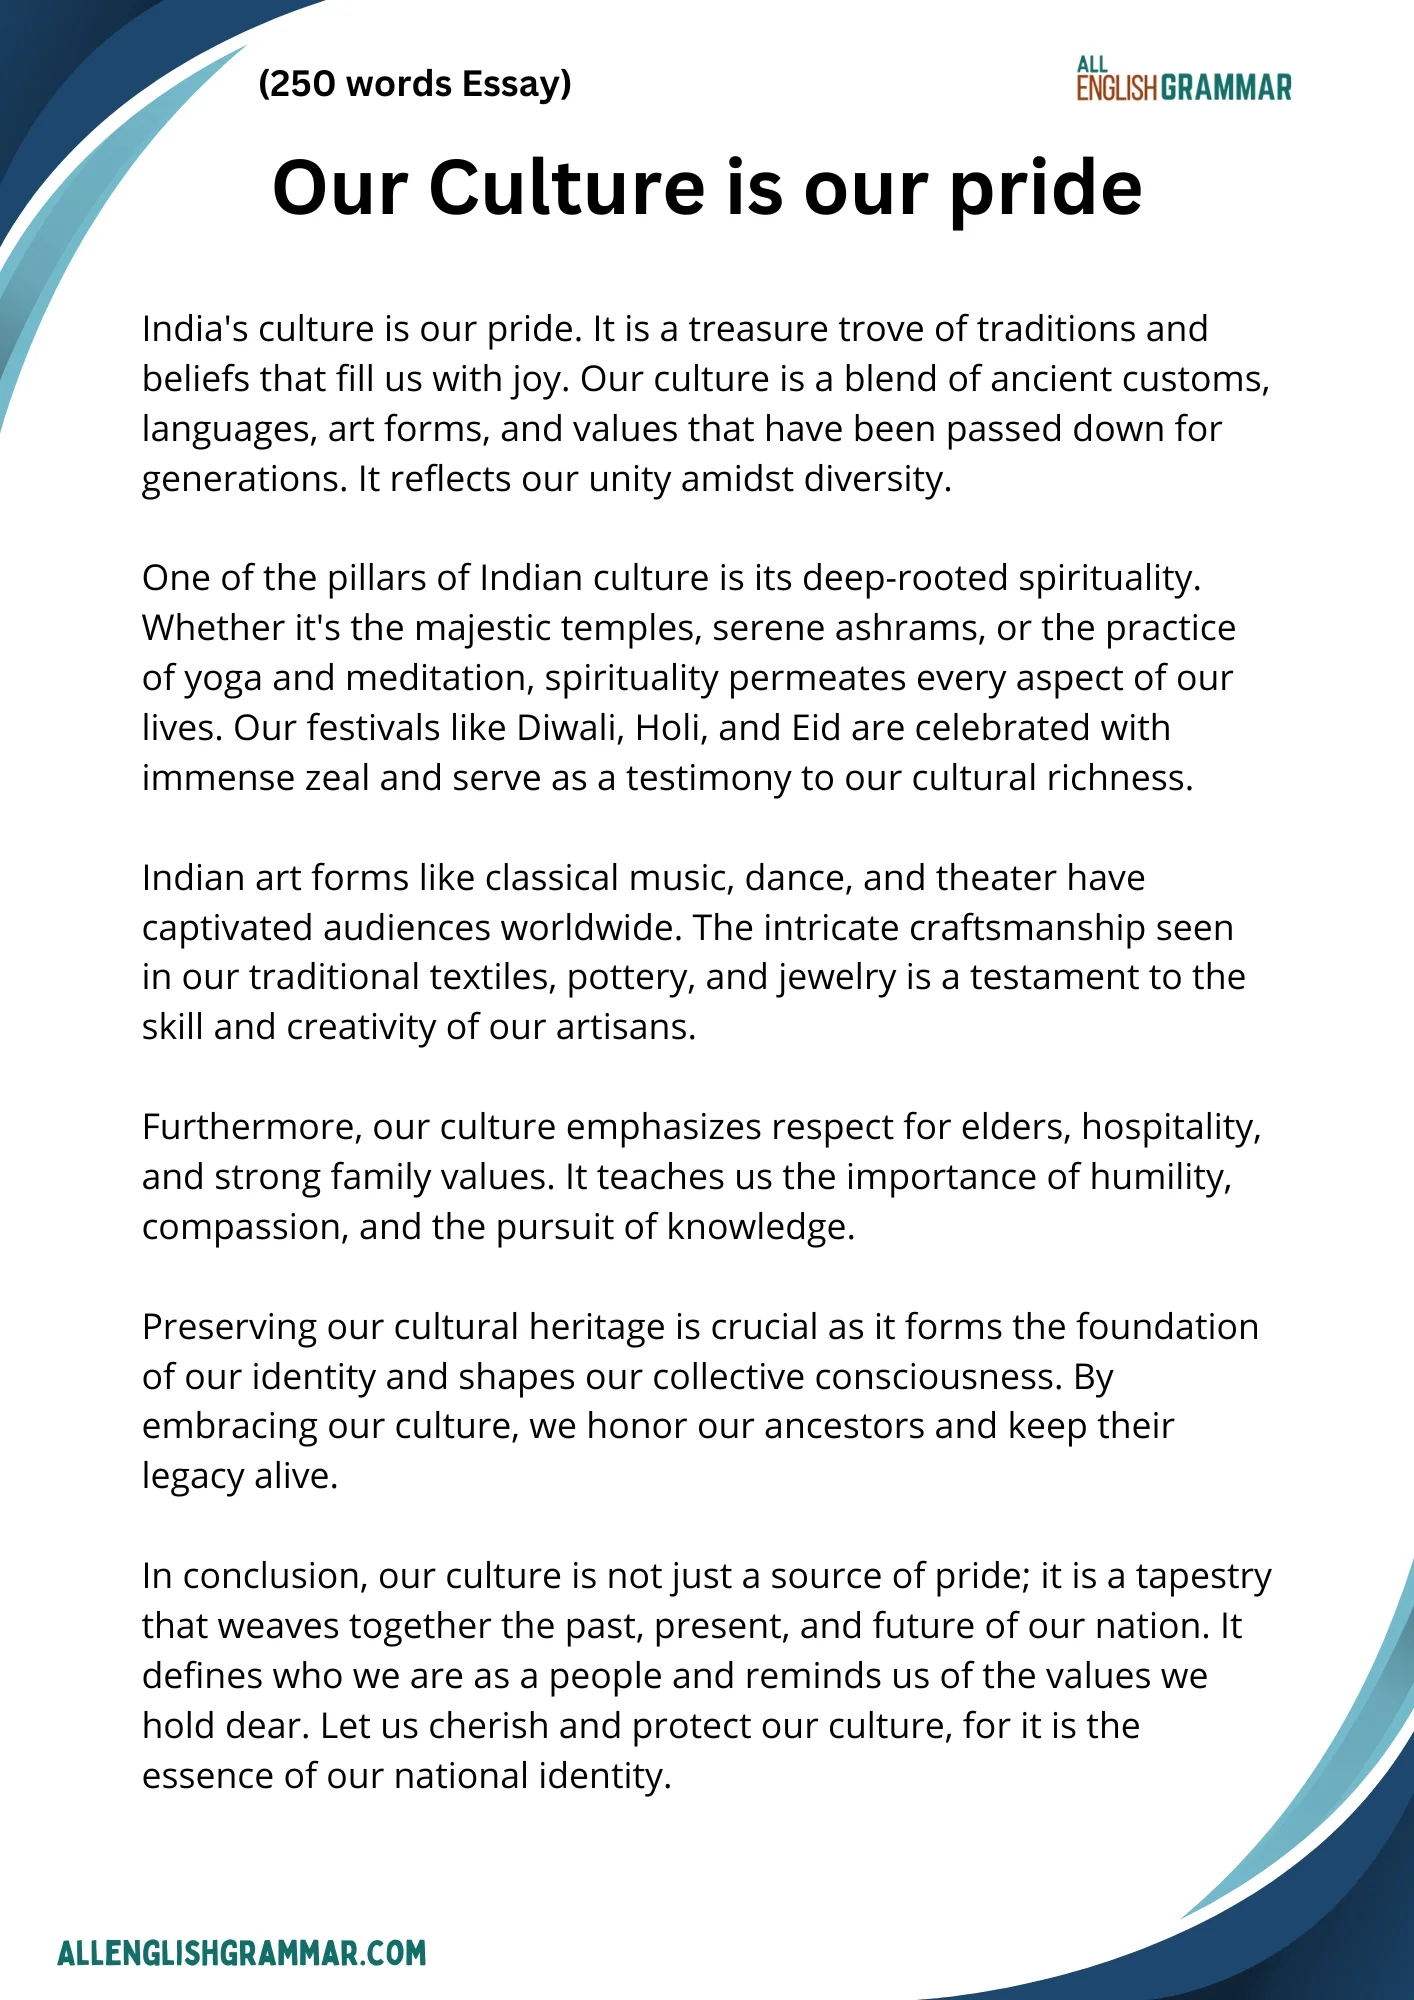 Our Culture is Our Pride Essay 250 Words